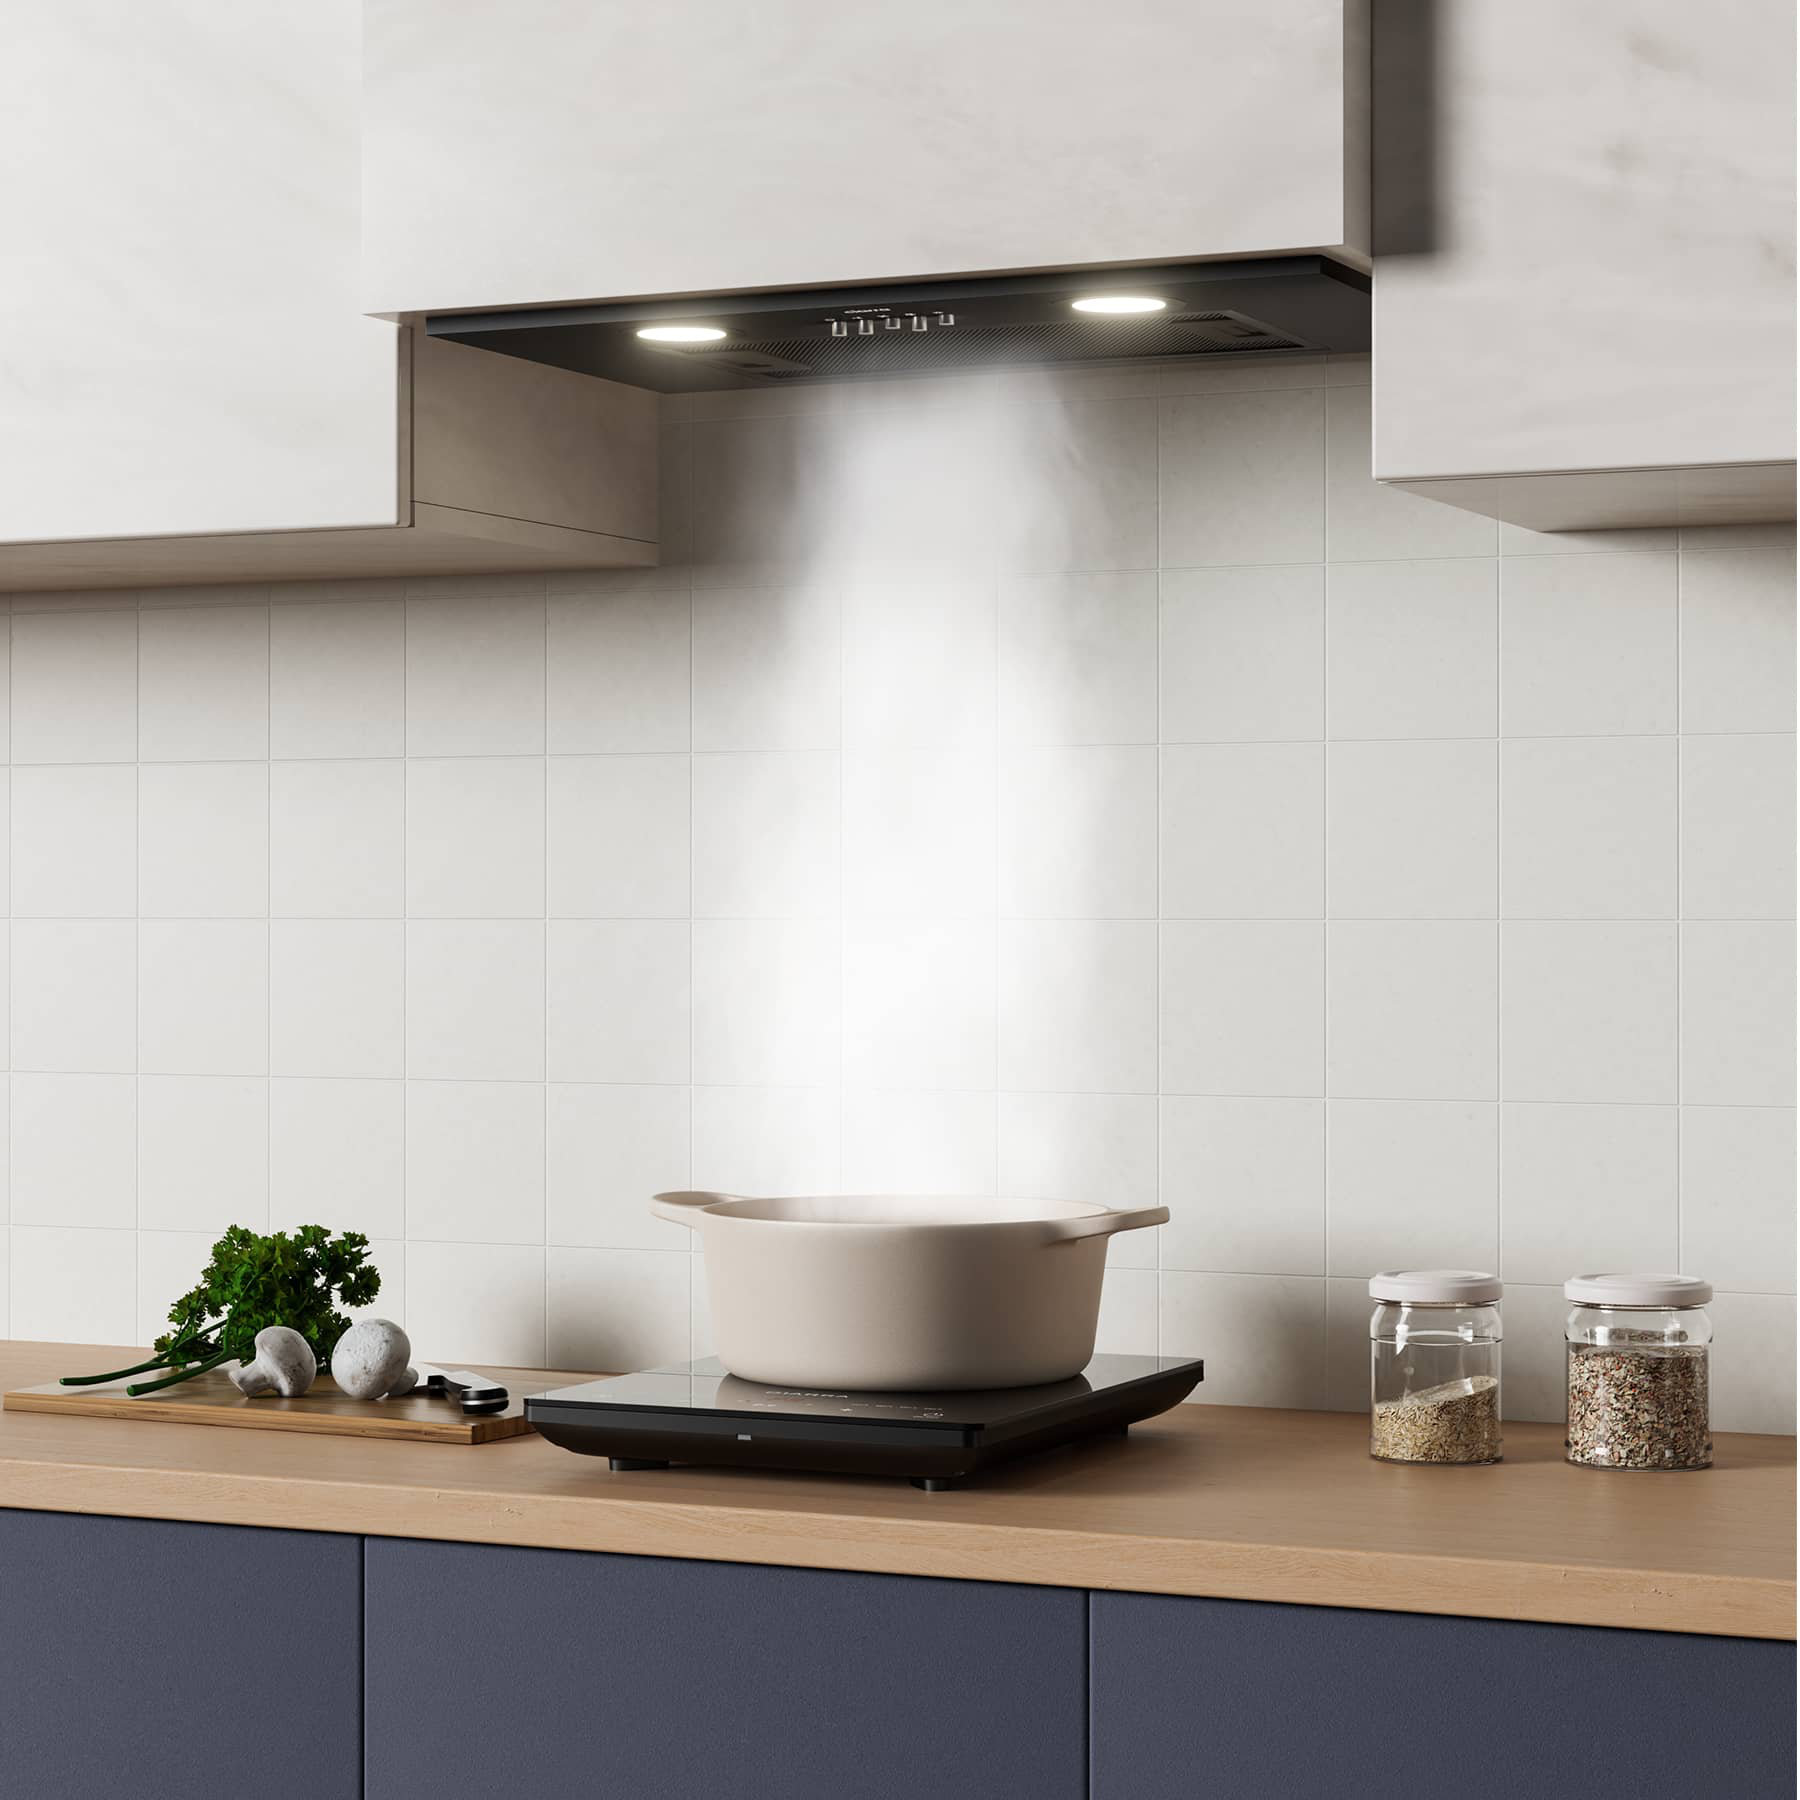 CIARRA Wall Mount Range Hood 30 inch 450CFM with Push Button